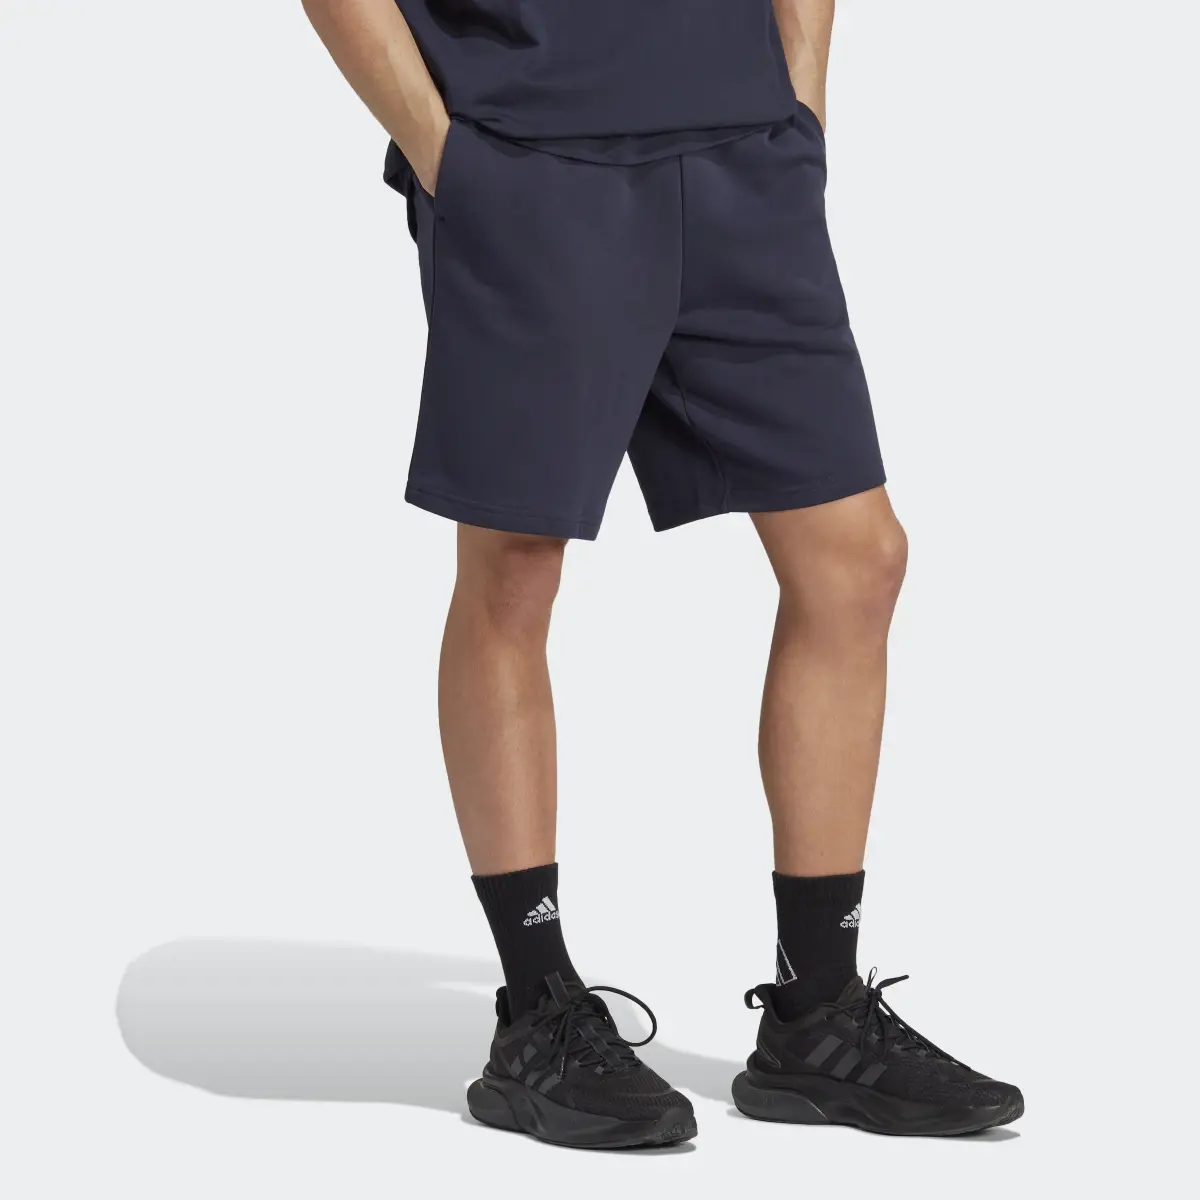 Adidas ALL SZN French Terry Shorts. 3